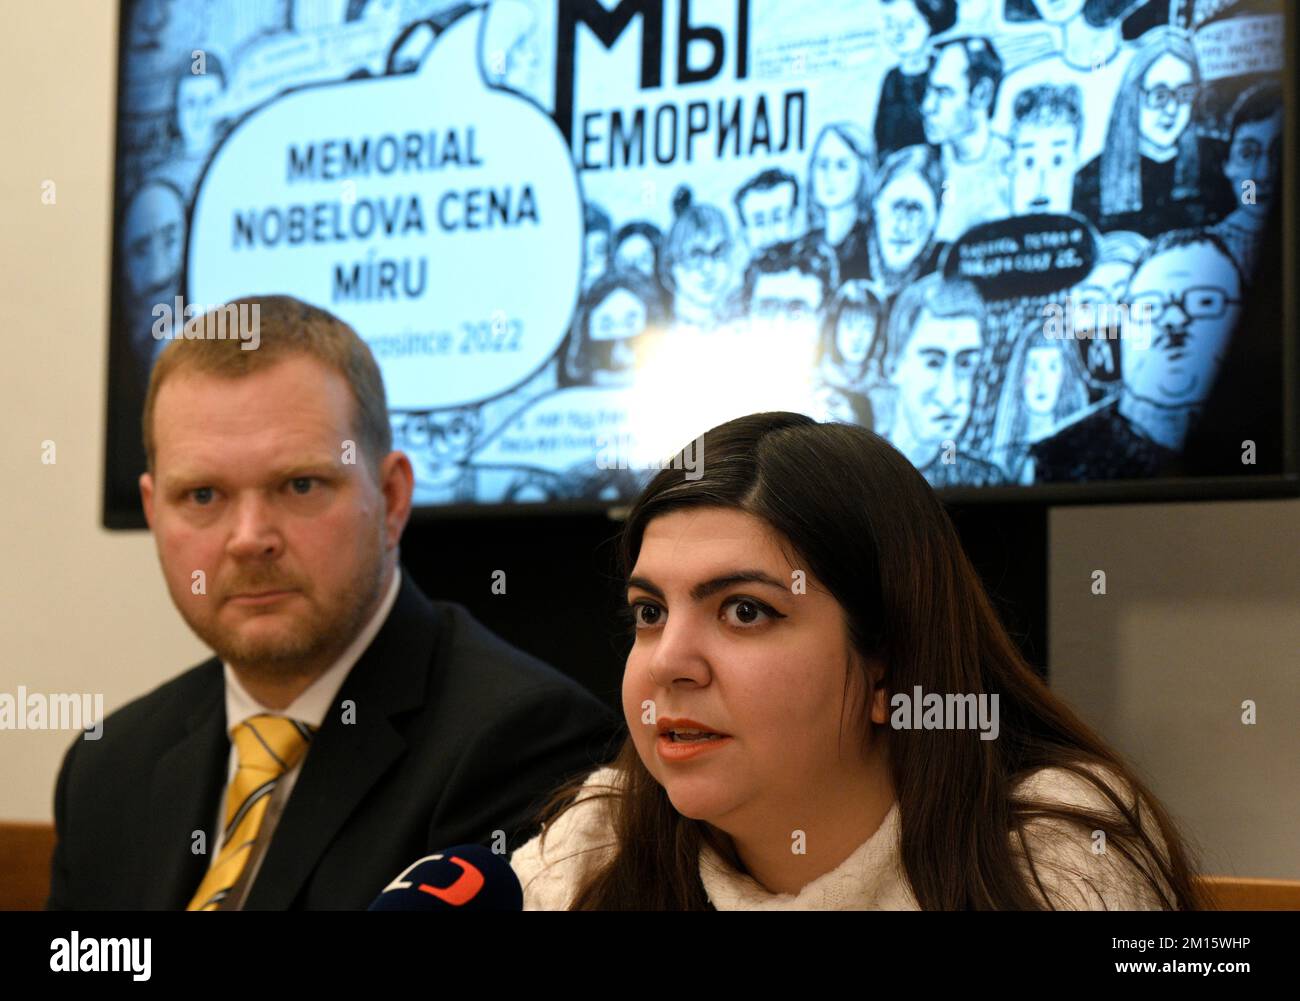 Stepan Cernousek, left, and Tamila Imanova of the Memorial association attend a press conference in Prague on occasion of the awarding of the Nobel Peace Prize to Memorial in Oslo today, on Saturday, December 10, 2022. Belenkin hopes that the Memorial human rights organisation, for which he works, will be able to keep working in Russia despite the very difficult circumstances, he said at a press conference. Along with Memorial, the Ukrainian human rights organisation Center for Civil Liberties and imprisoned Belarusian human rights advocate Ales Bialiatski who founded the Viasna human rights c Stock Photo